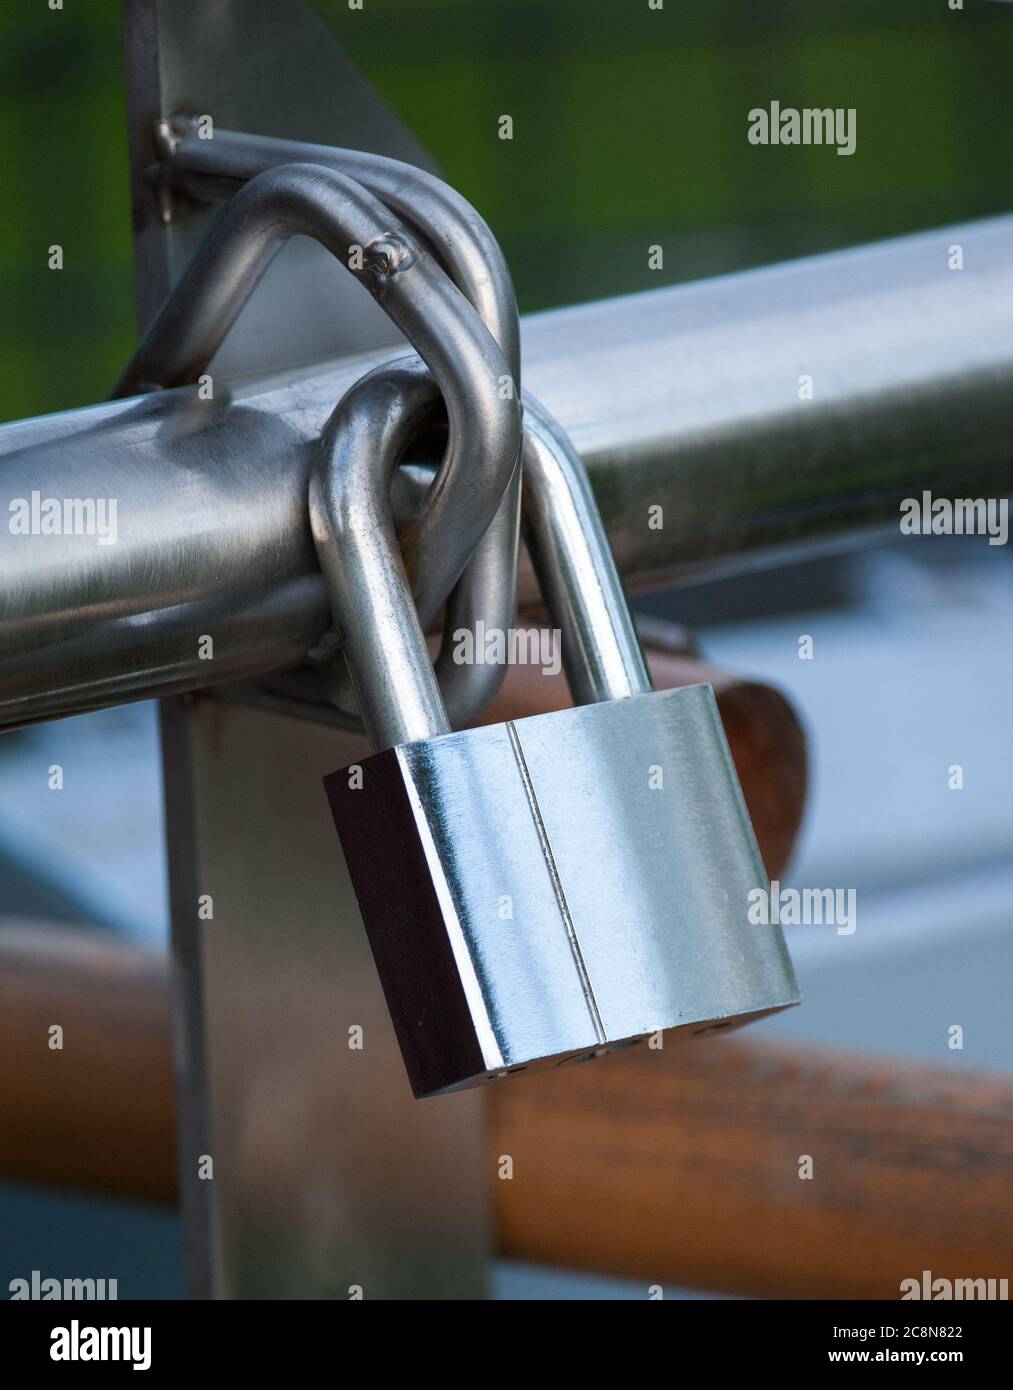 padlock hanging on a fence Stock Photo